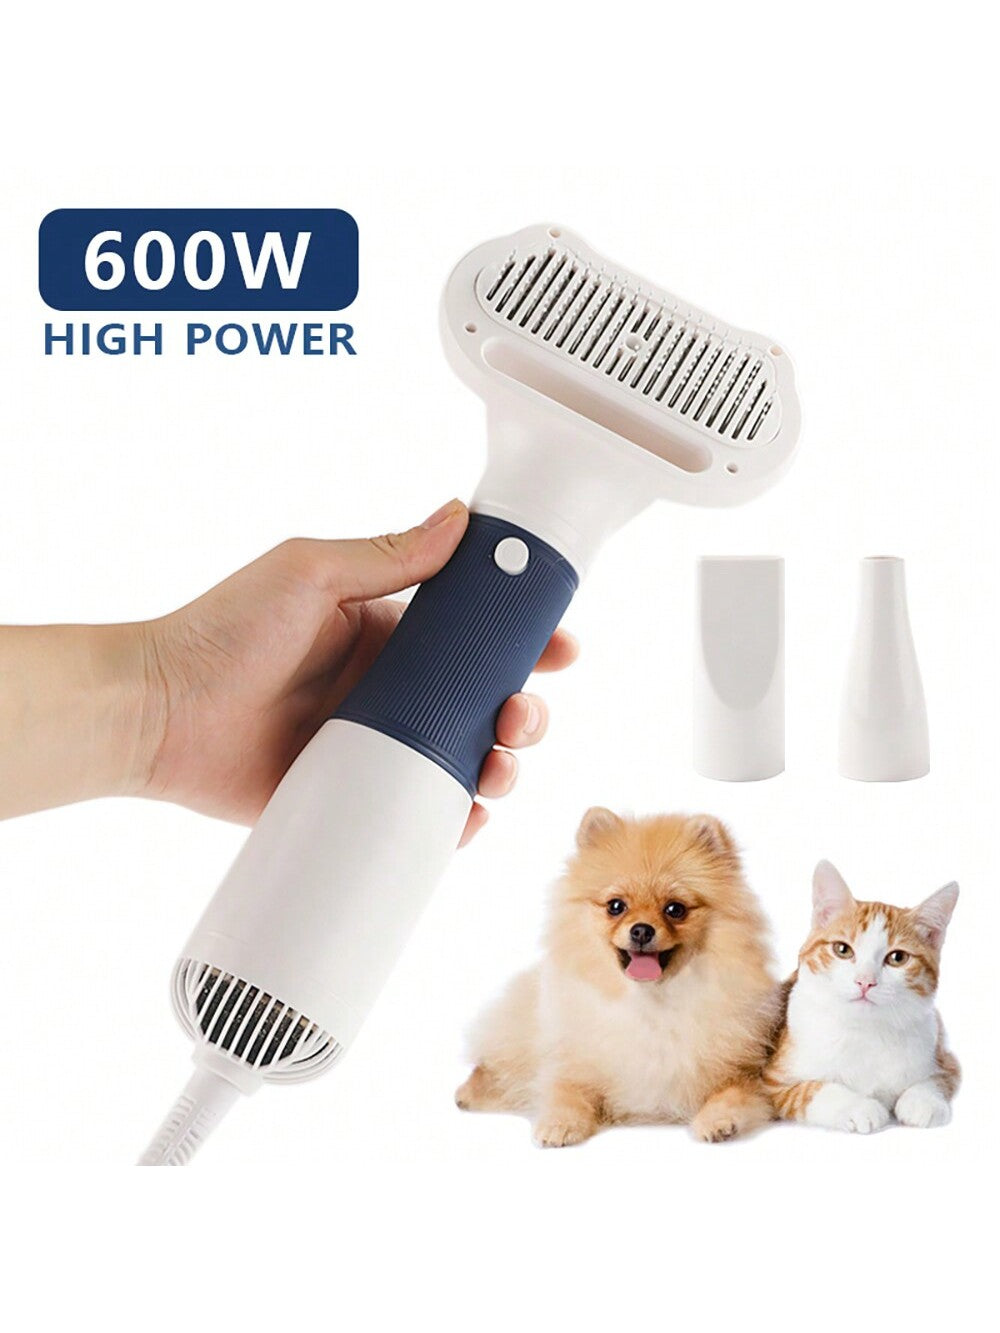 1pc Yellow Pet Hair Dryer, 3-in-1 Pet Hair Dryer, Comb And Hair Remover Tool, Adjustable Speed And Temperature, Suitable For Cat And Small Dog Grooming